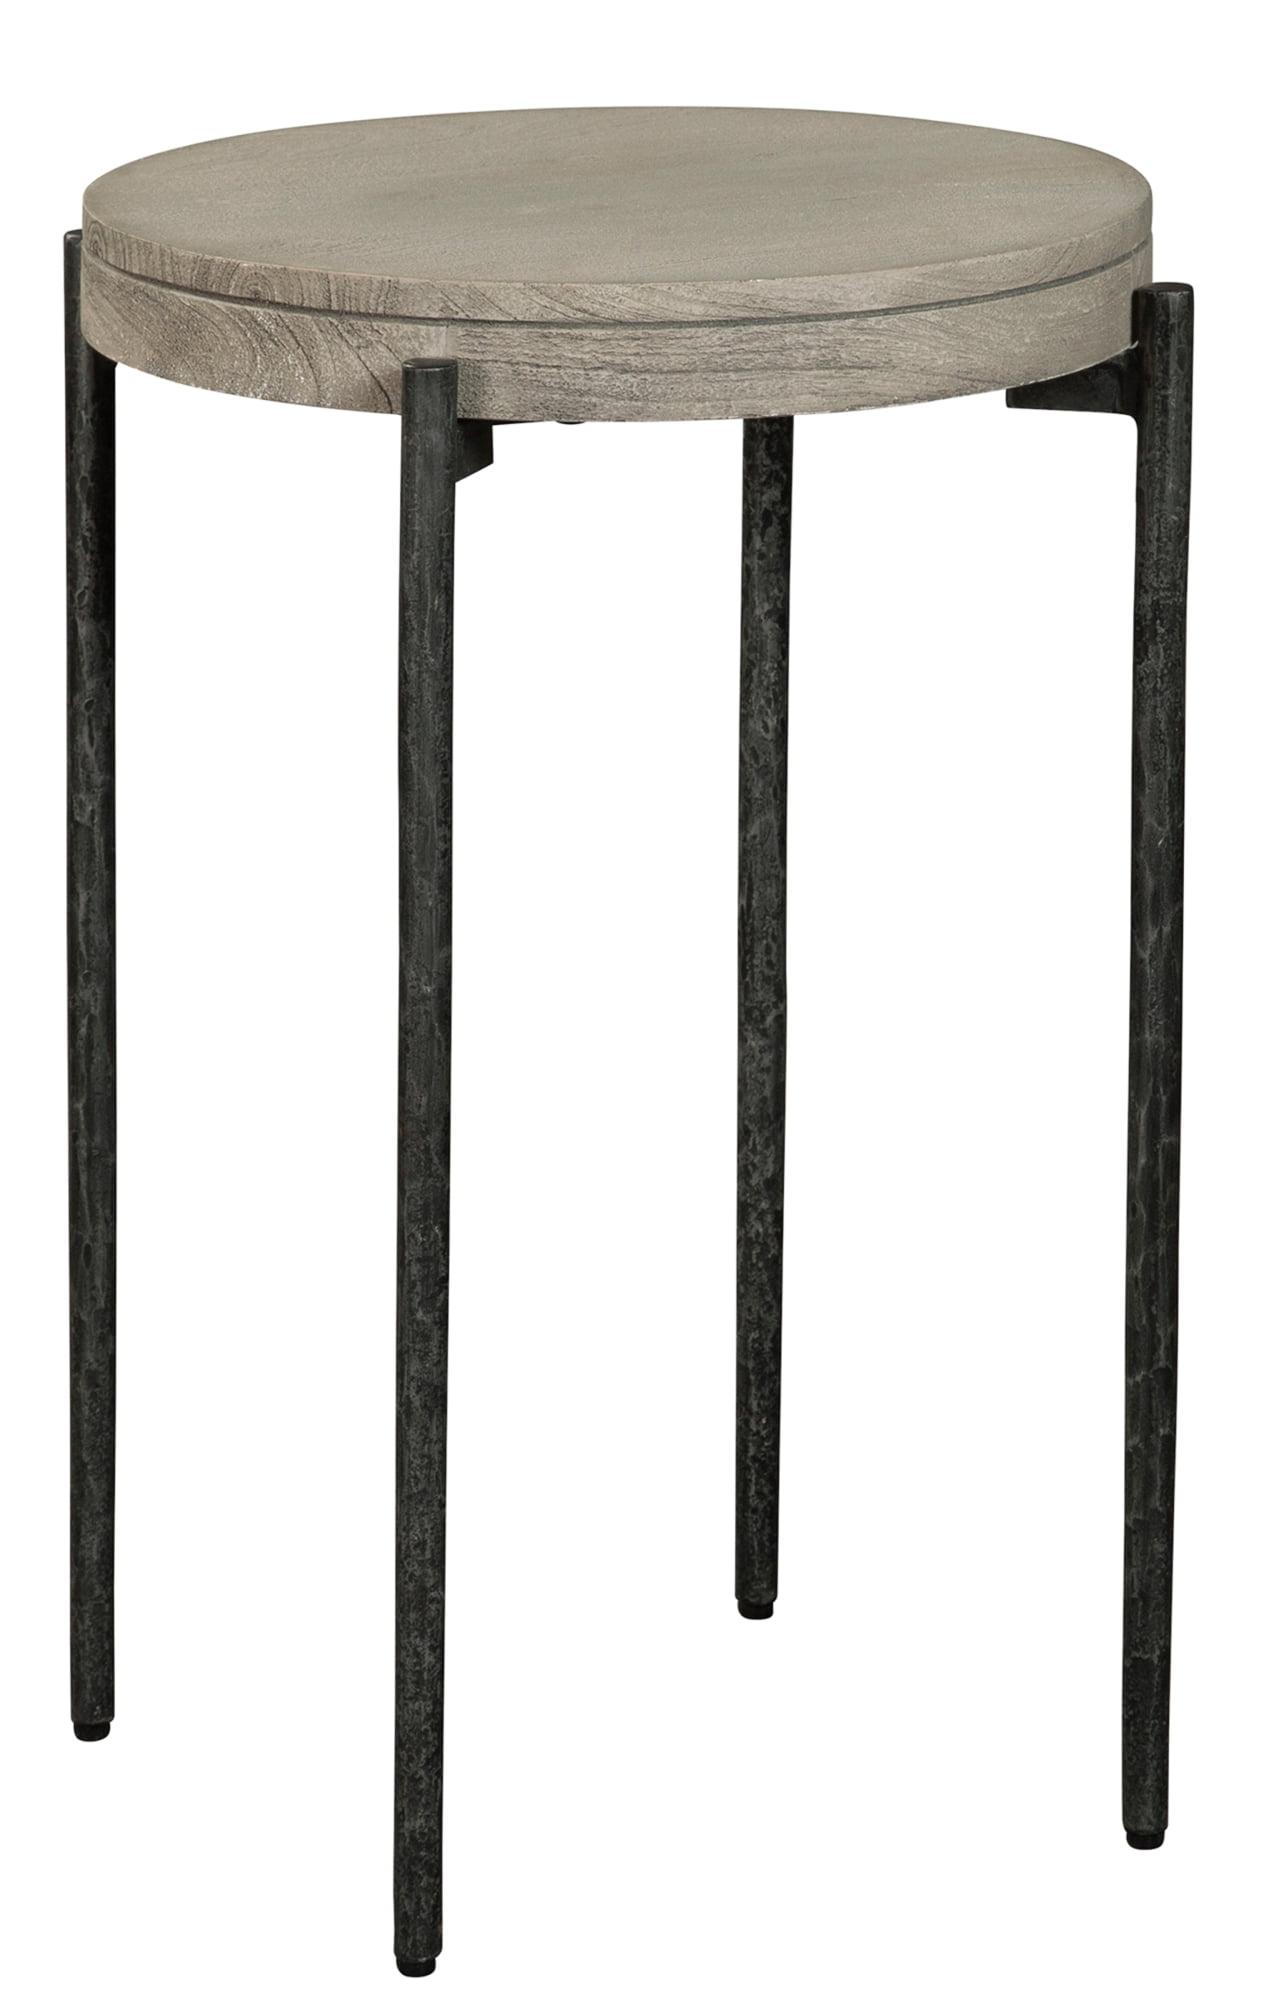 Bedford Gray Mango Wood and Metal Round Chairside Table